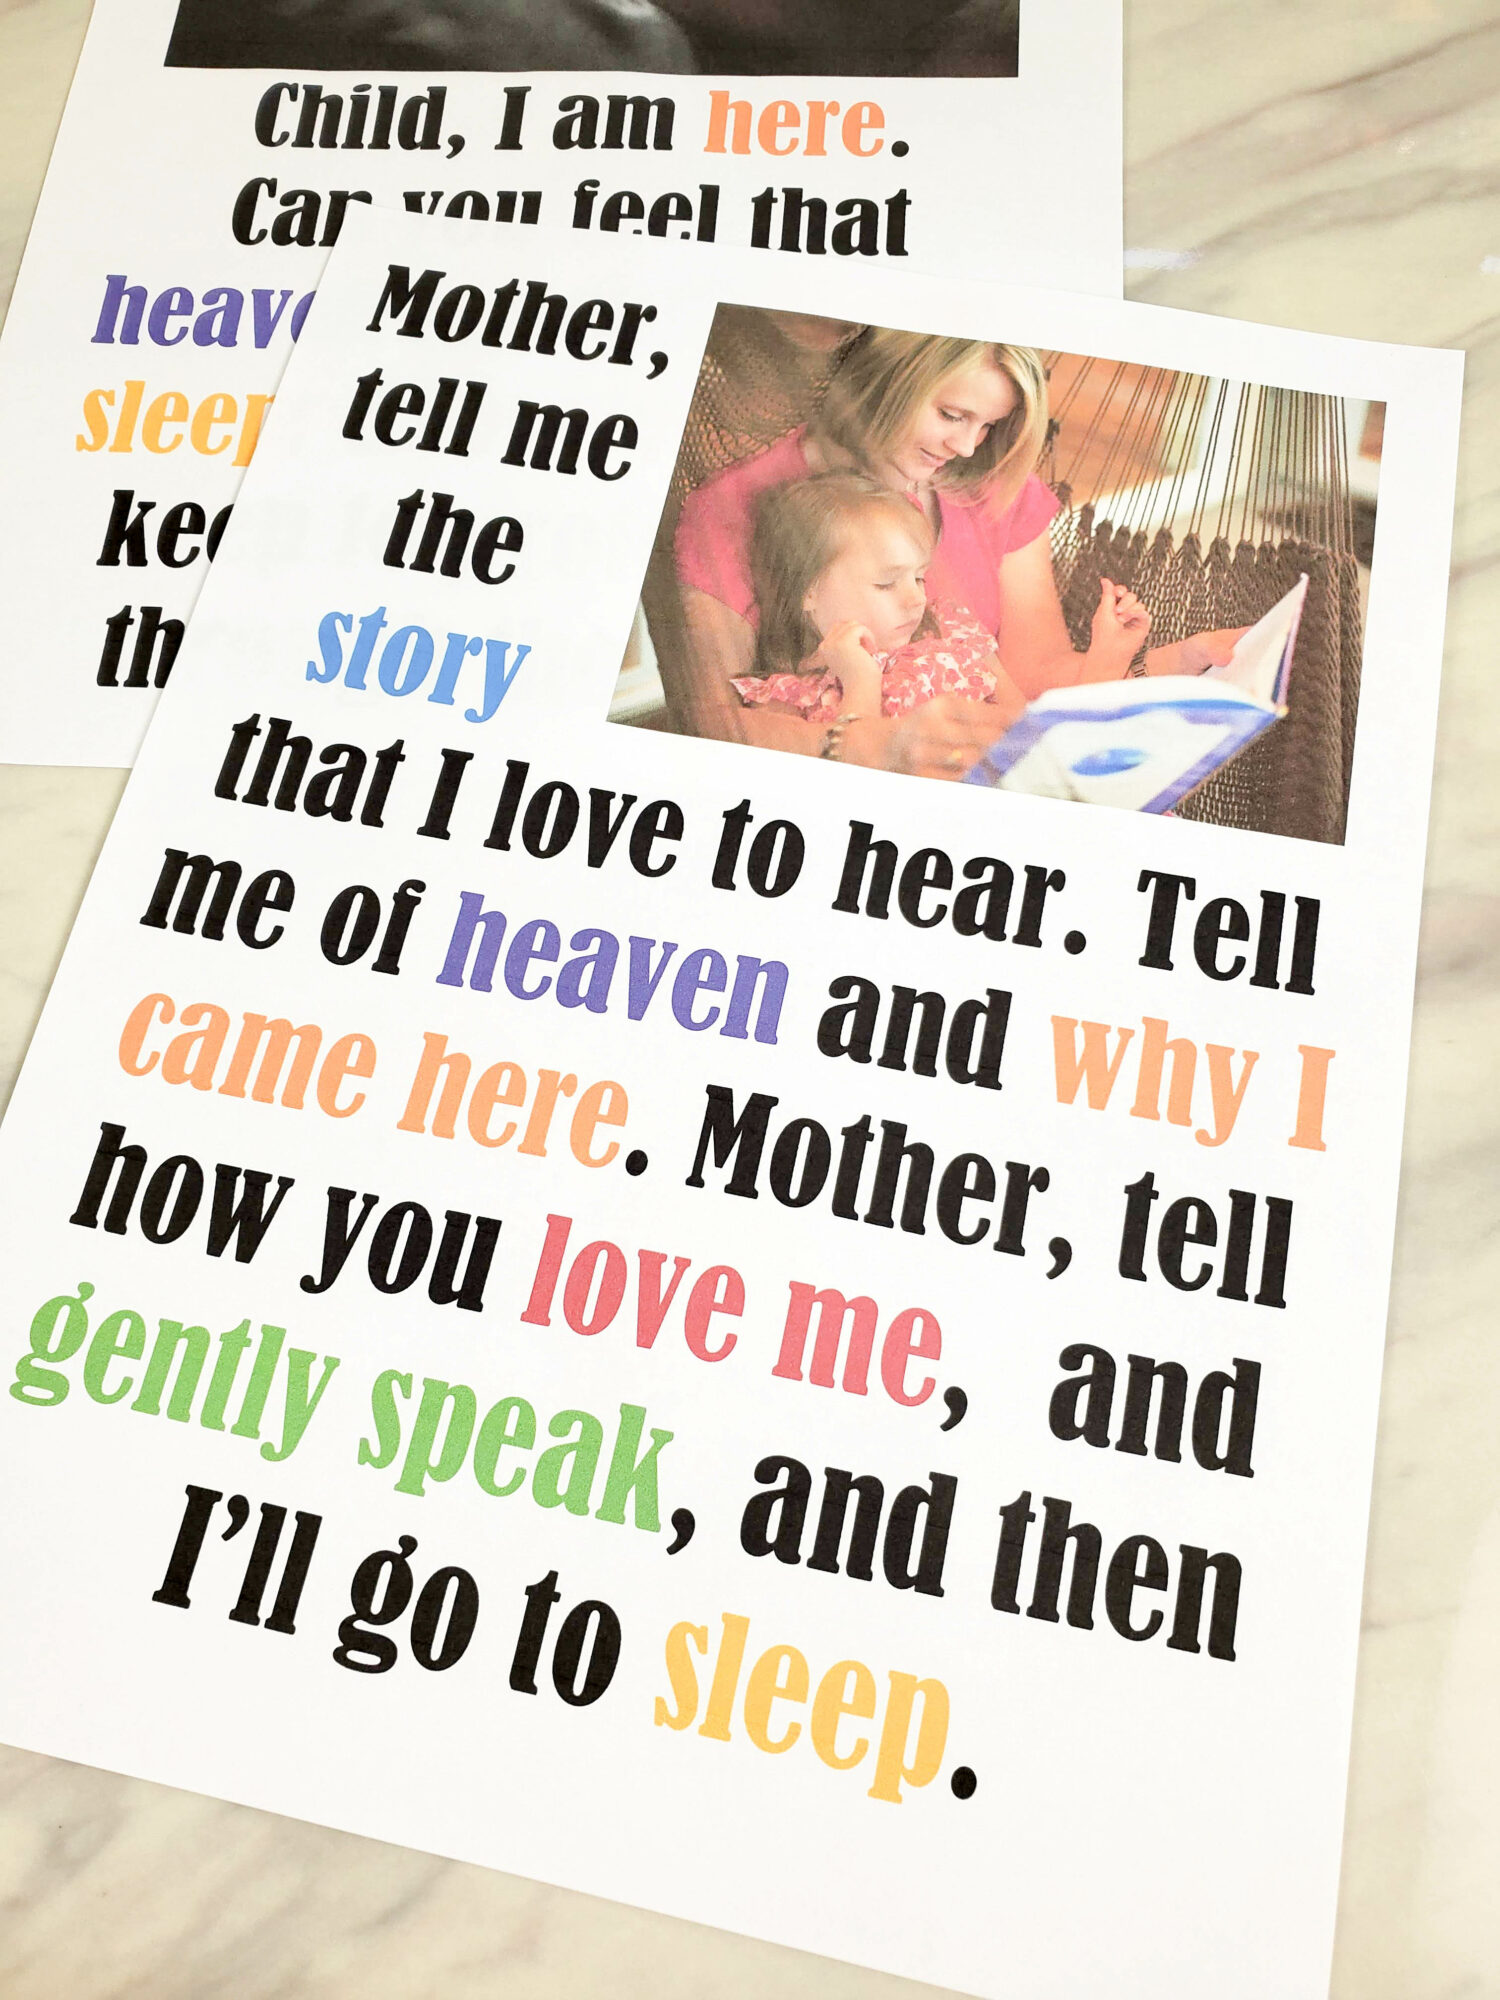 Mother Tell Me the Story flip chart and lyrics singing time helps for LDS Primary Music Leaders teaching this Mother's Day Song